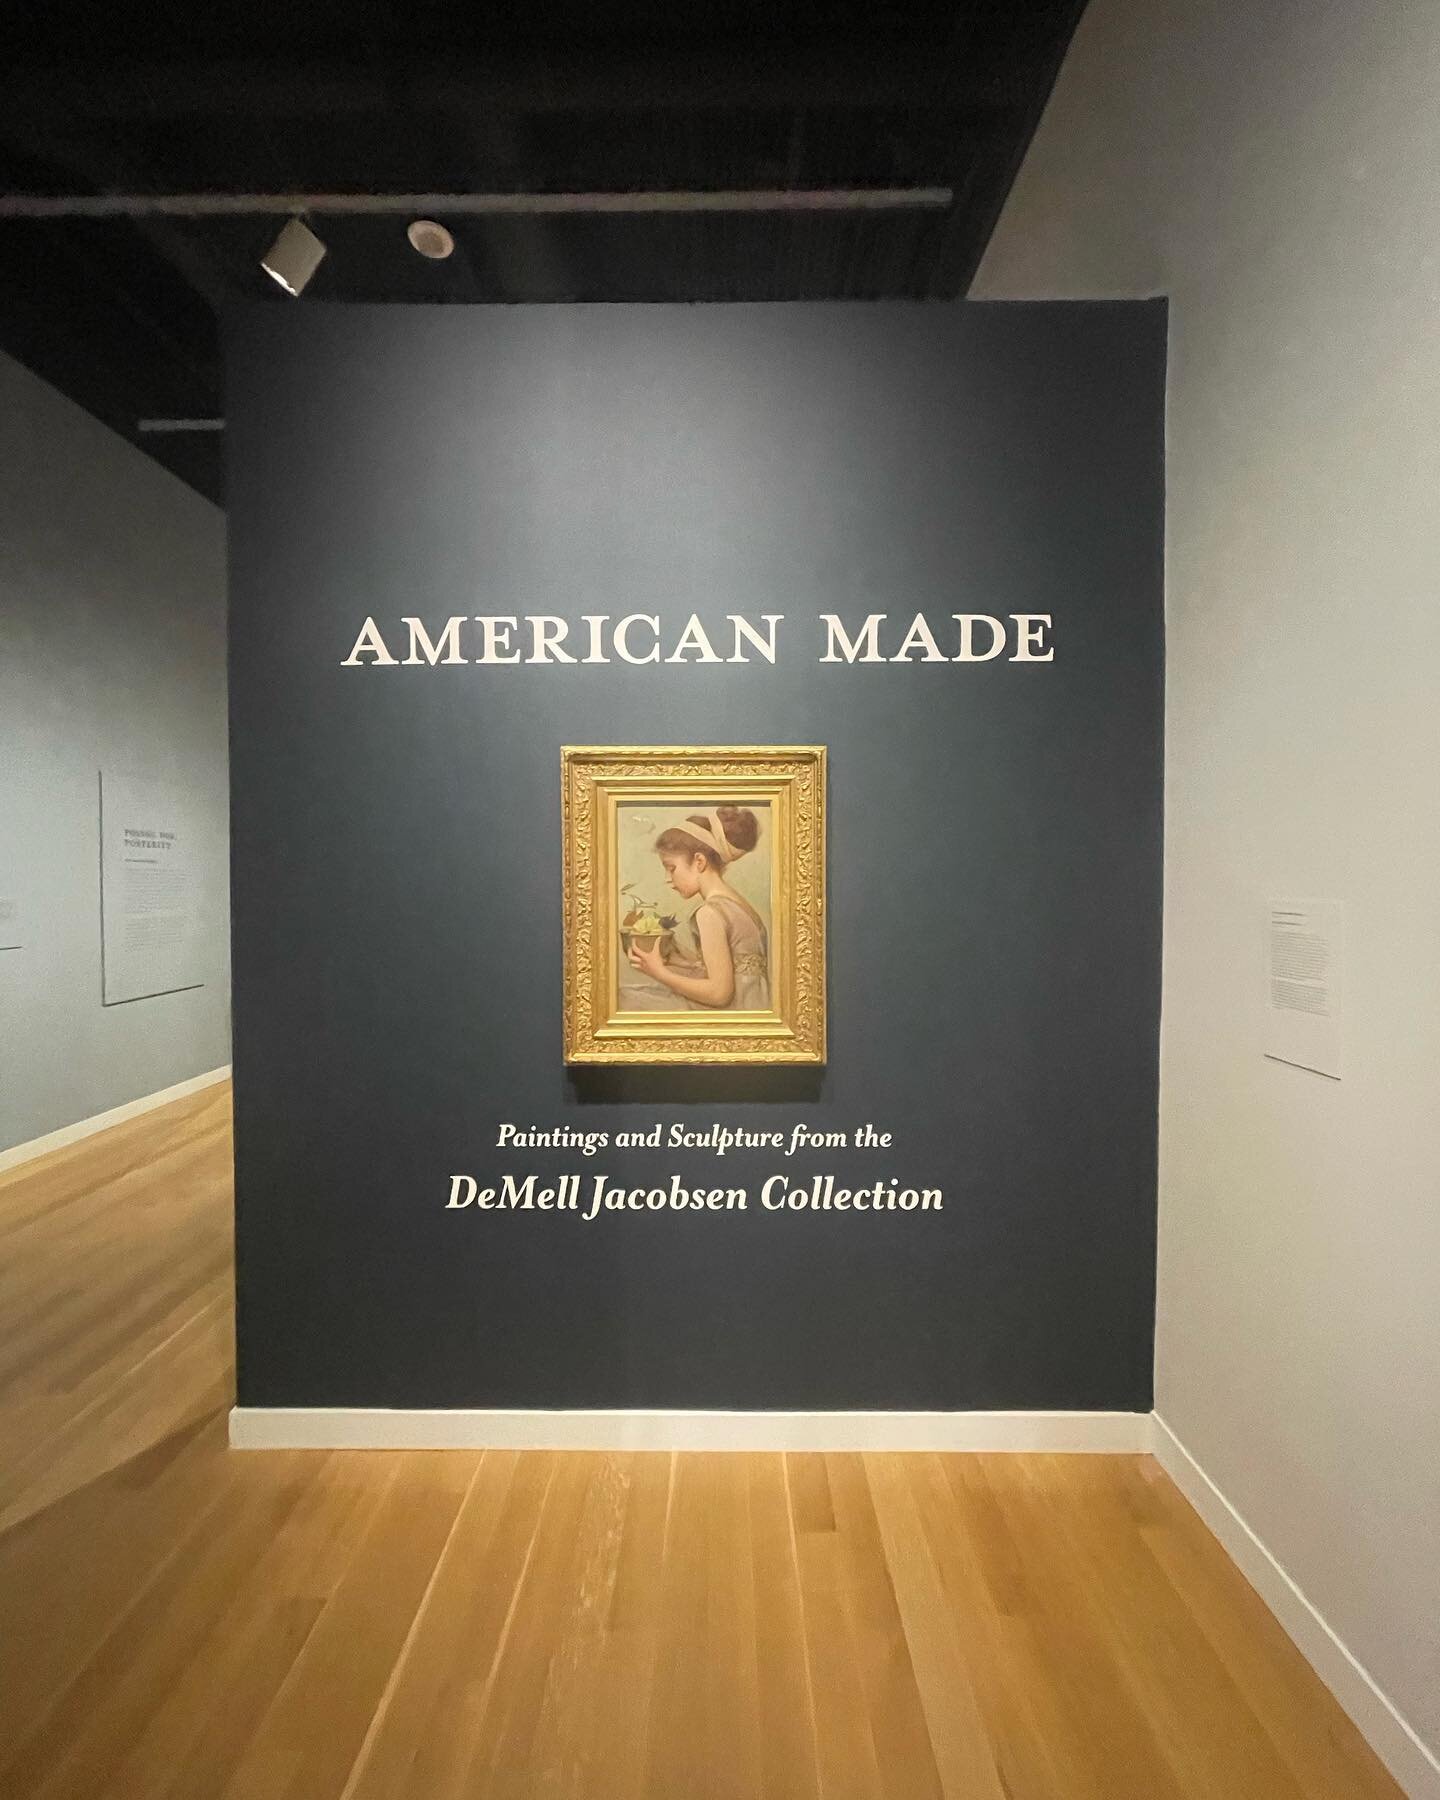 &ldquo;American Made: Paintings and Sculpture from the DeMell Jacobsen Collection&rdquo; on view @themintmuseum through December 24, 2022

American Made: Paintings and Sculpture from the DeMell Jacobsen Collection&nbsp;surveys two centuries of Americ